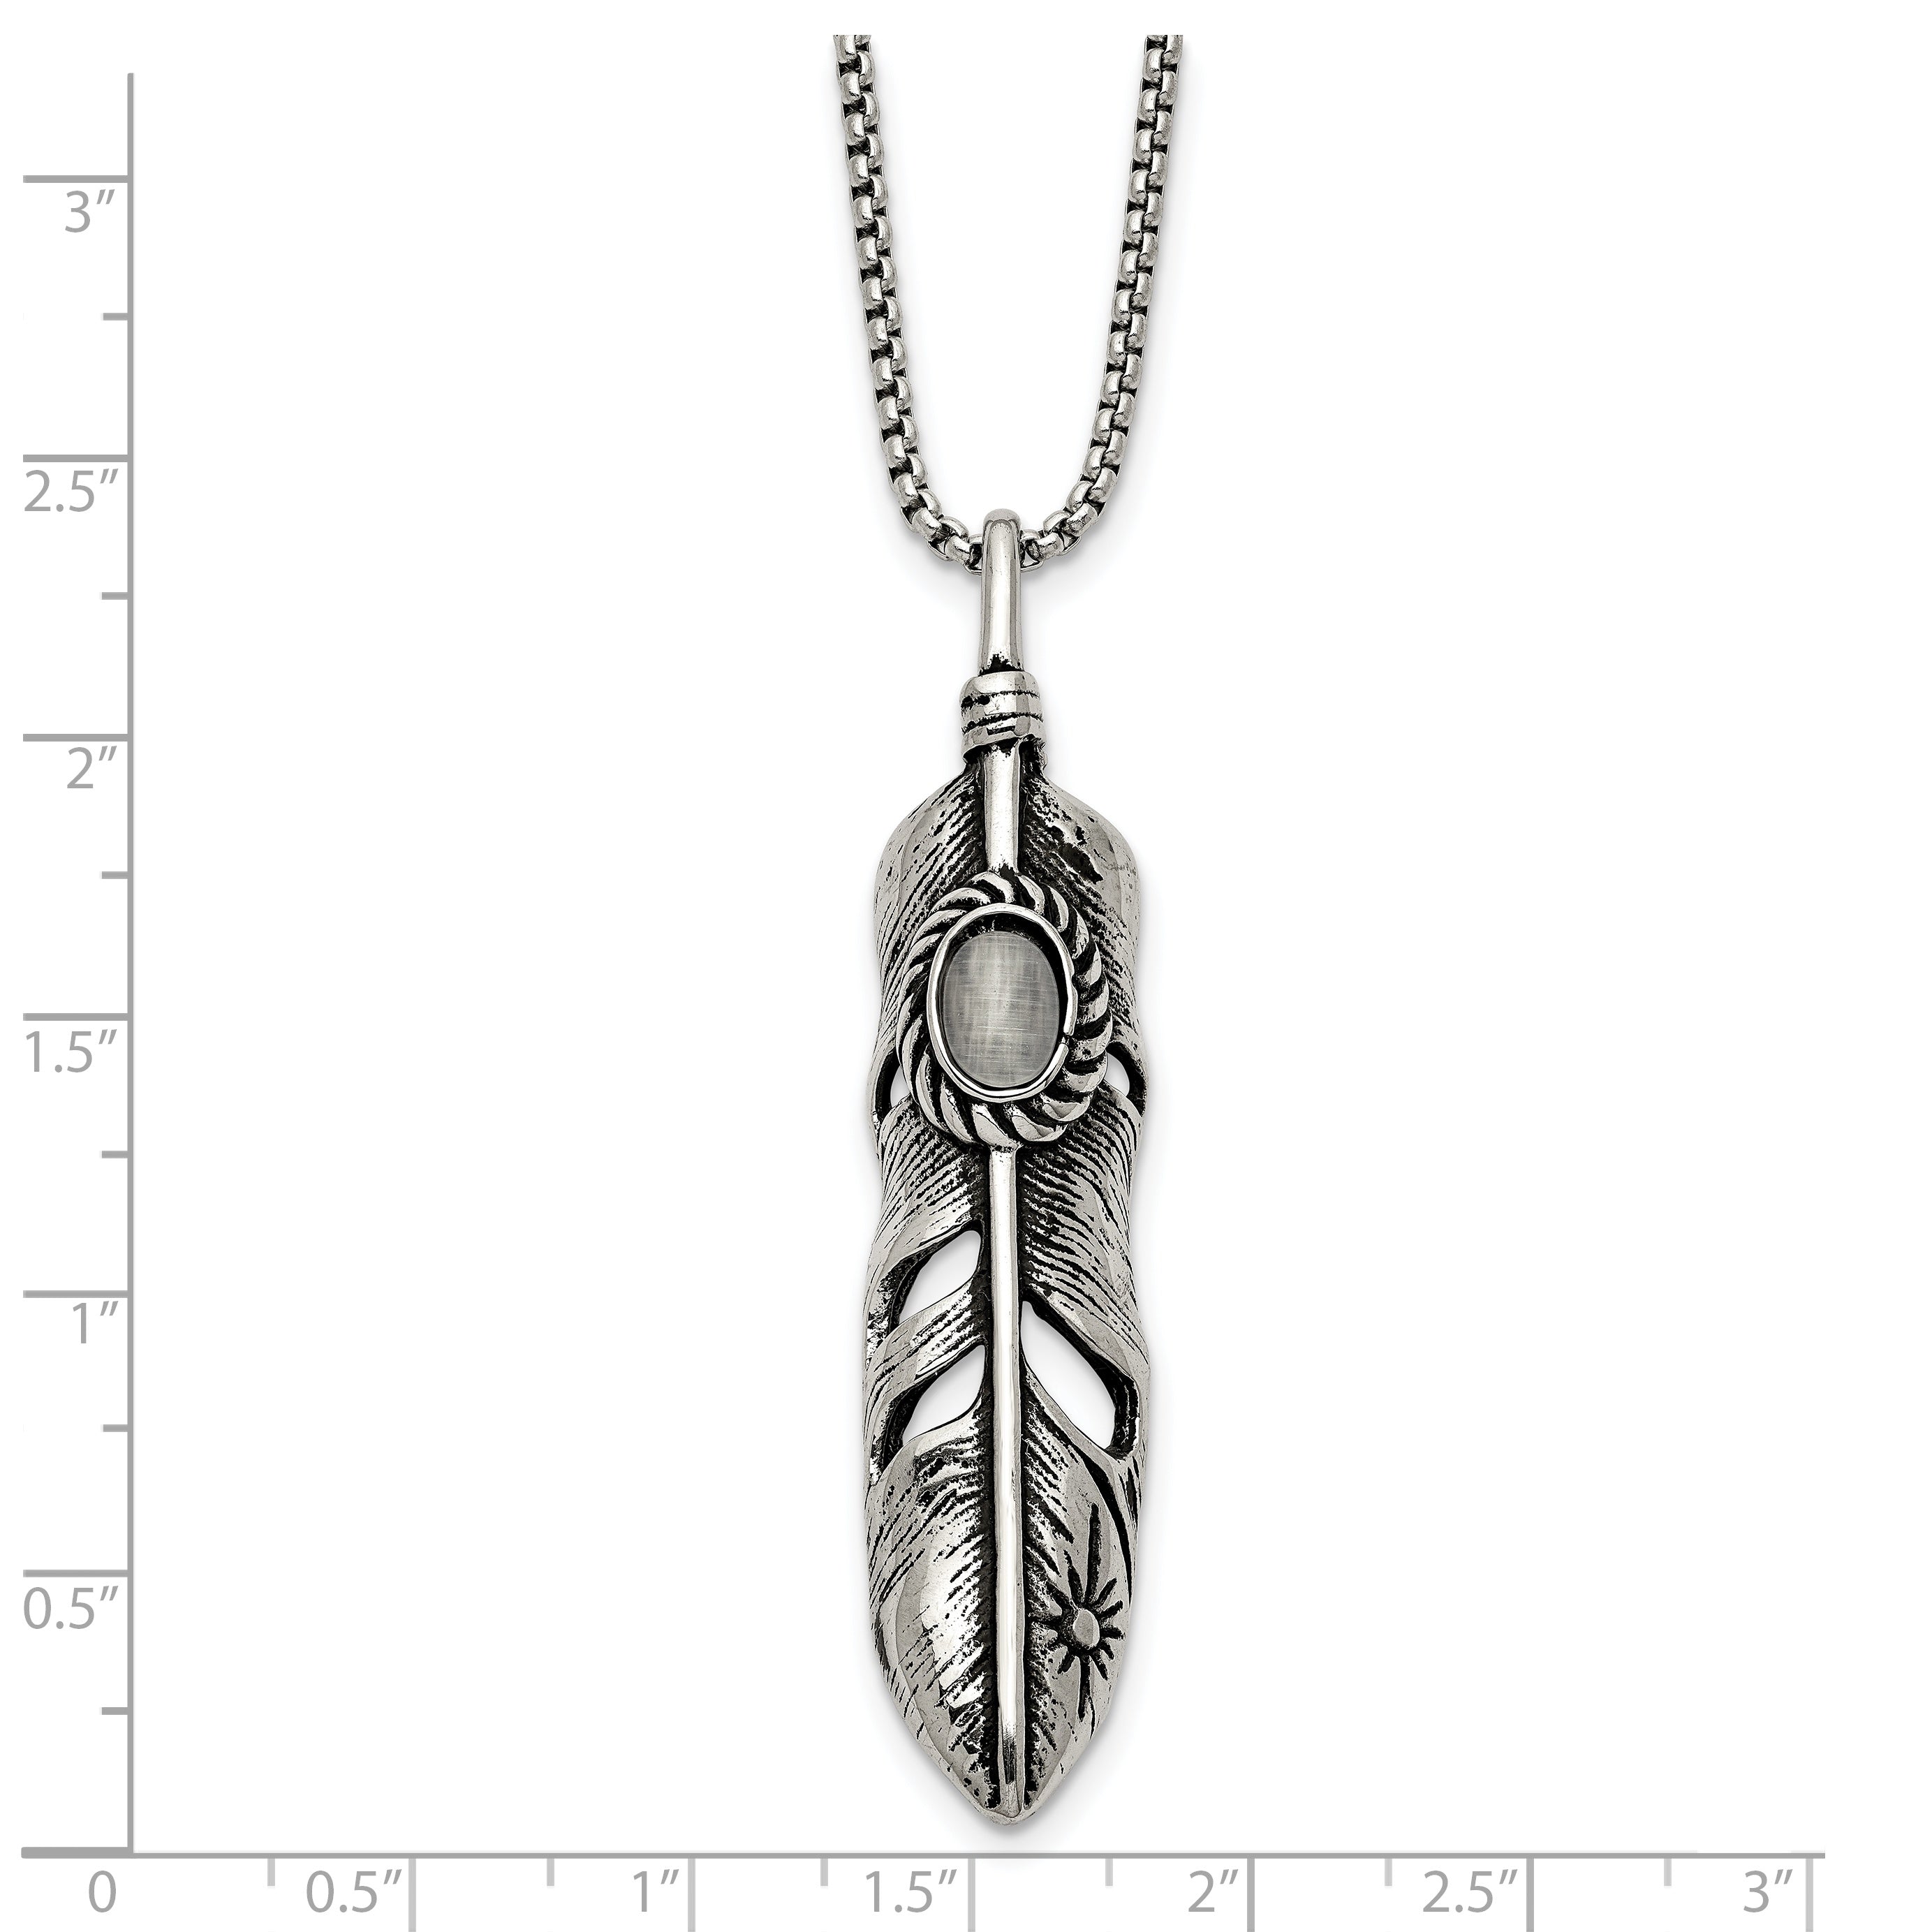 Chisel Stainless Steel Antiqued and Polished with White Cat's Eye Feather Pendant on a 24 inch Box Chain Necklace